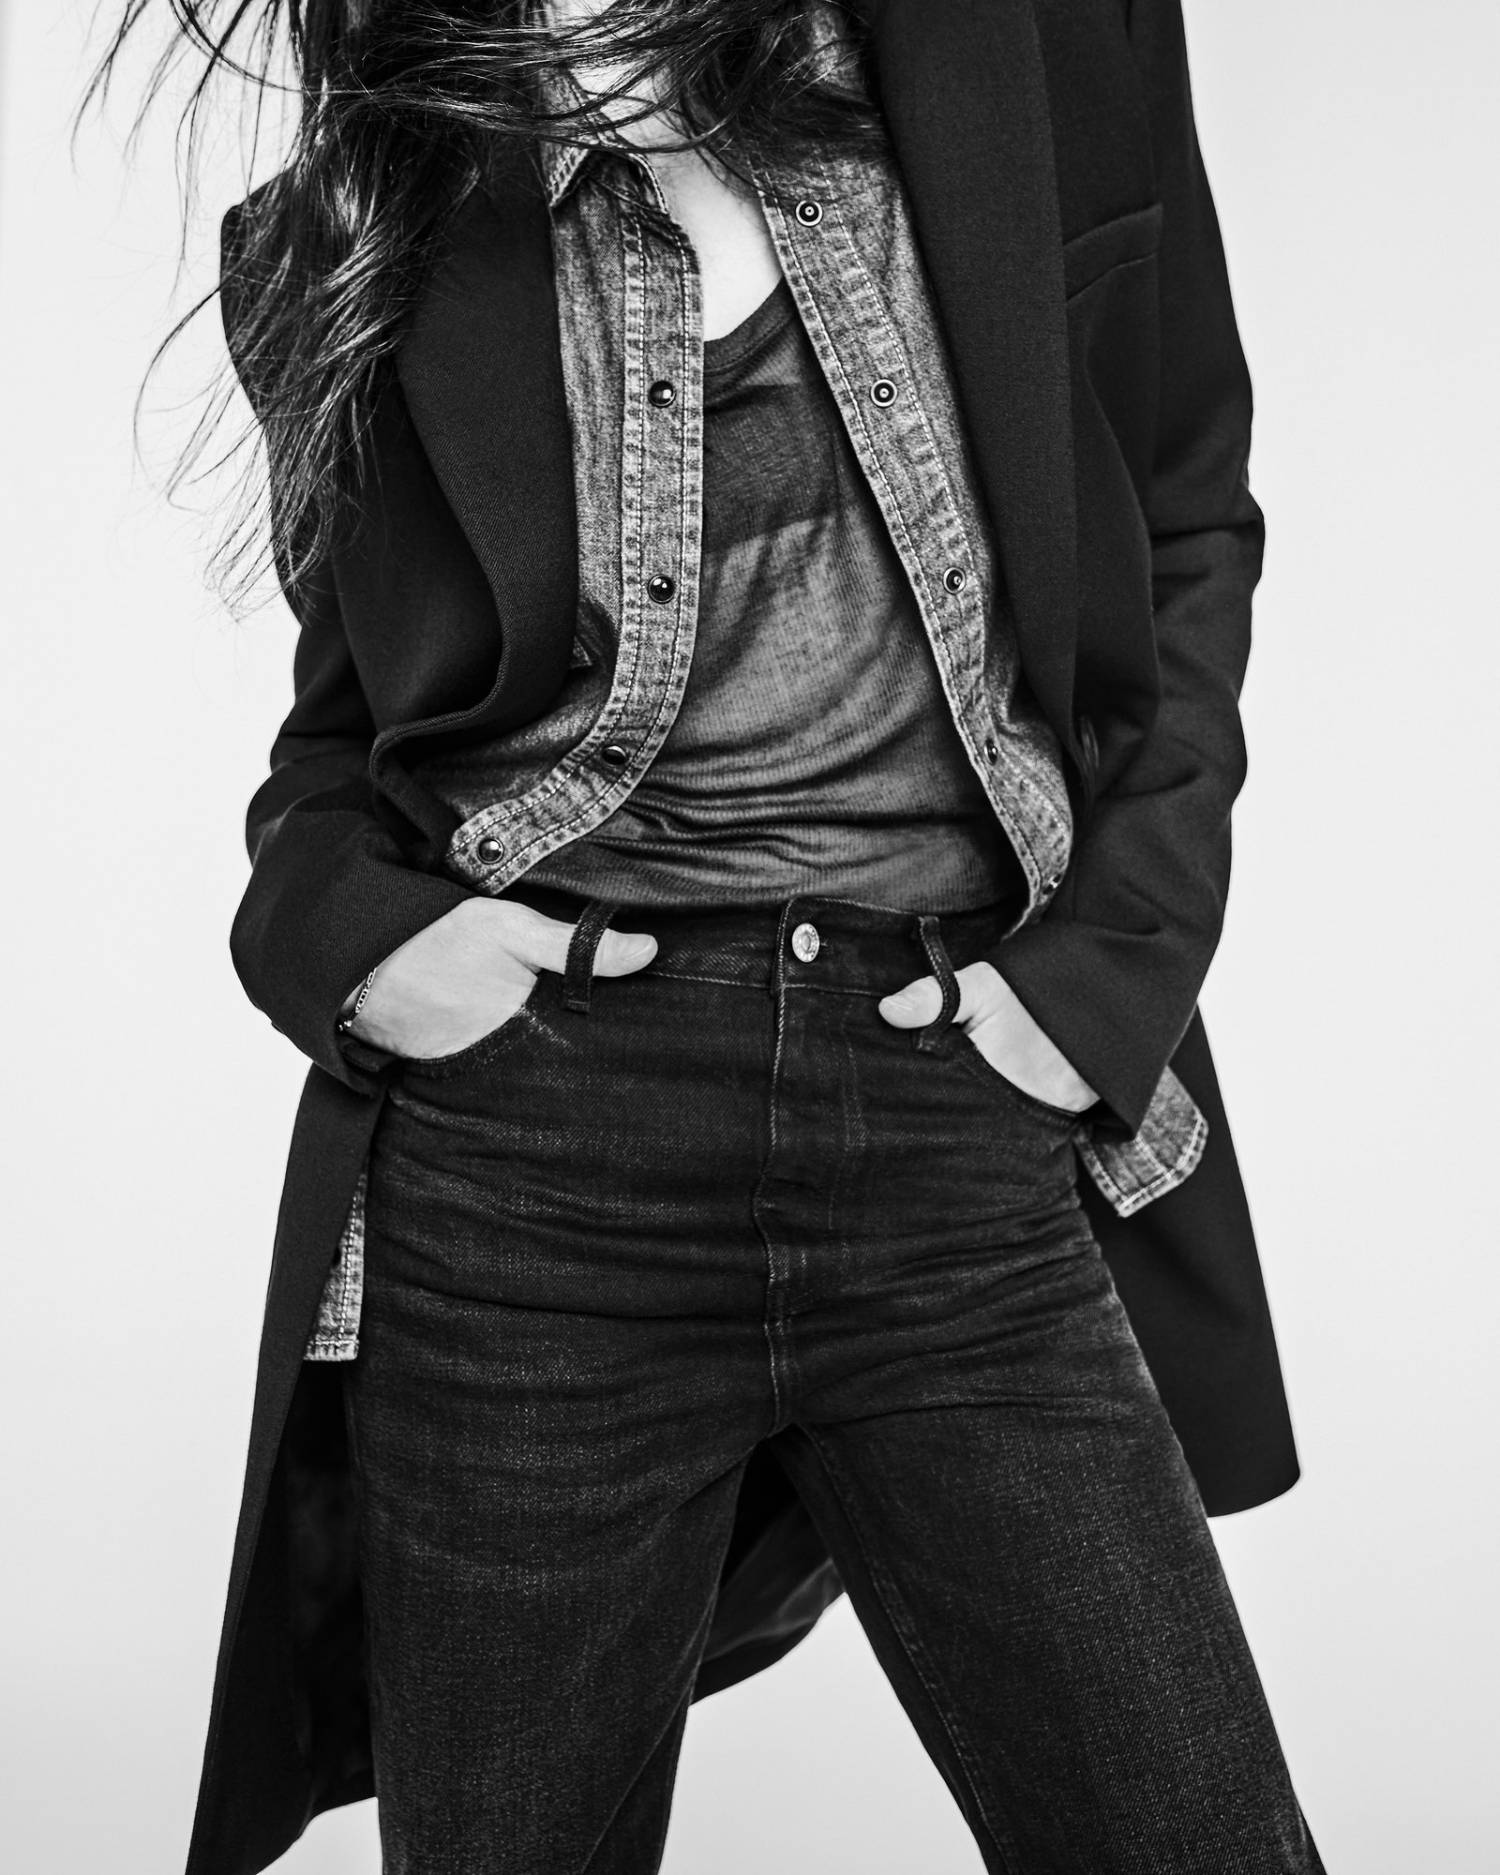 Charlotte Gainsbourg by Collier Schorr for Zara Denim Fall 2021 Ad Campaign